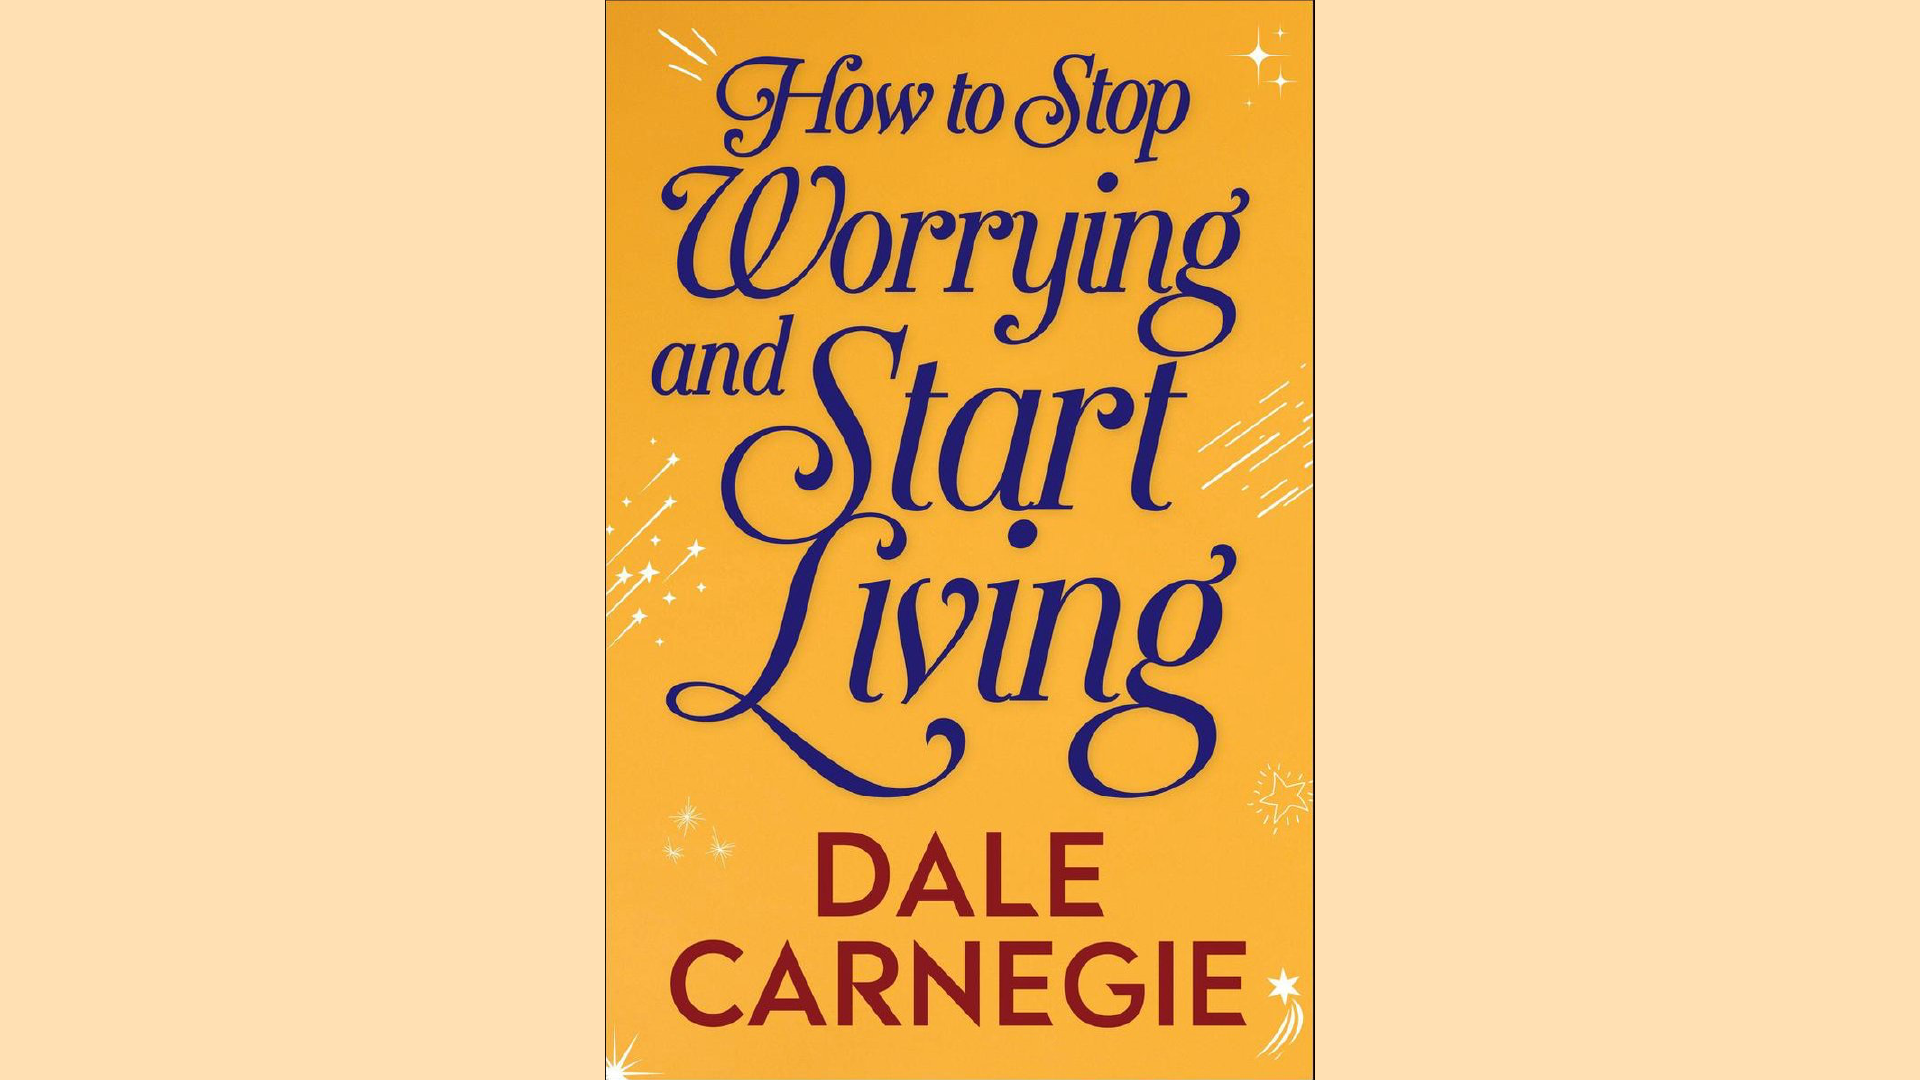 Summary: How to Stop Worrying and Start Living by Dale Carnegie